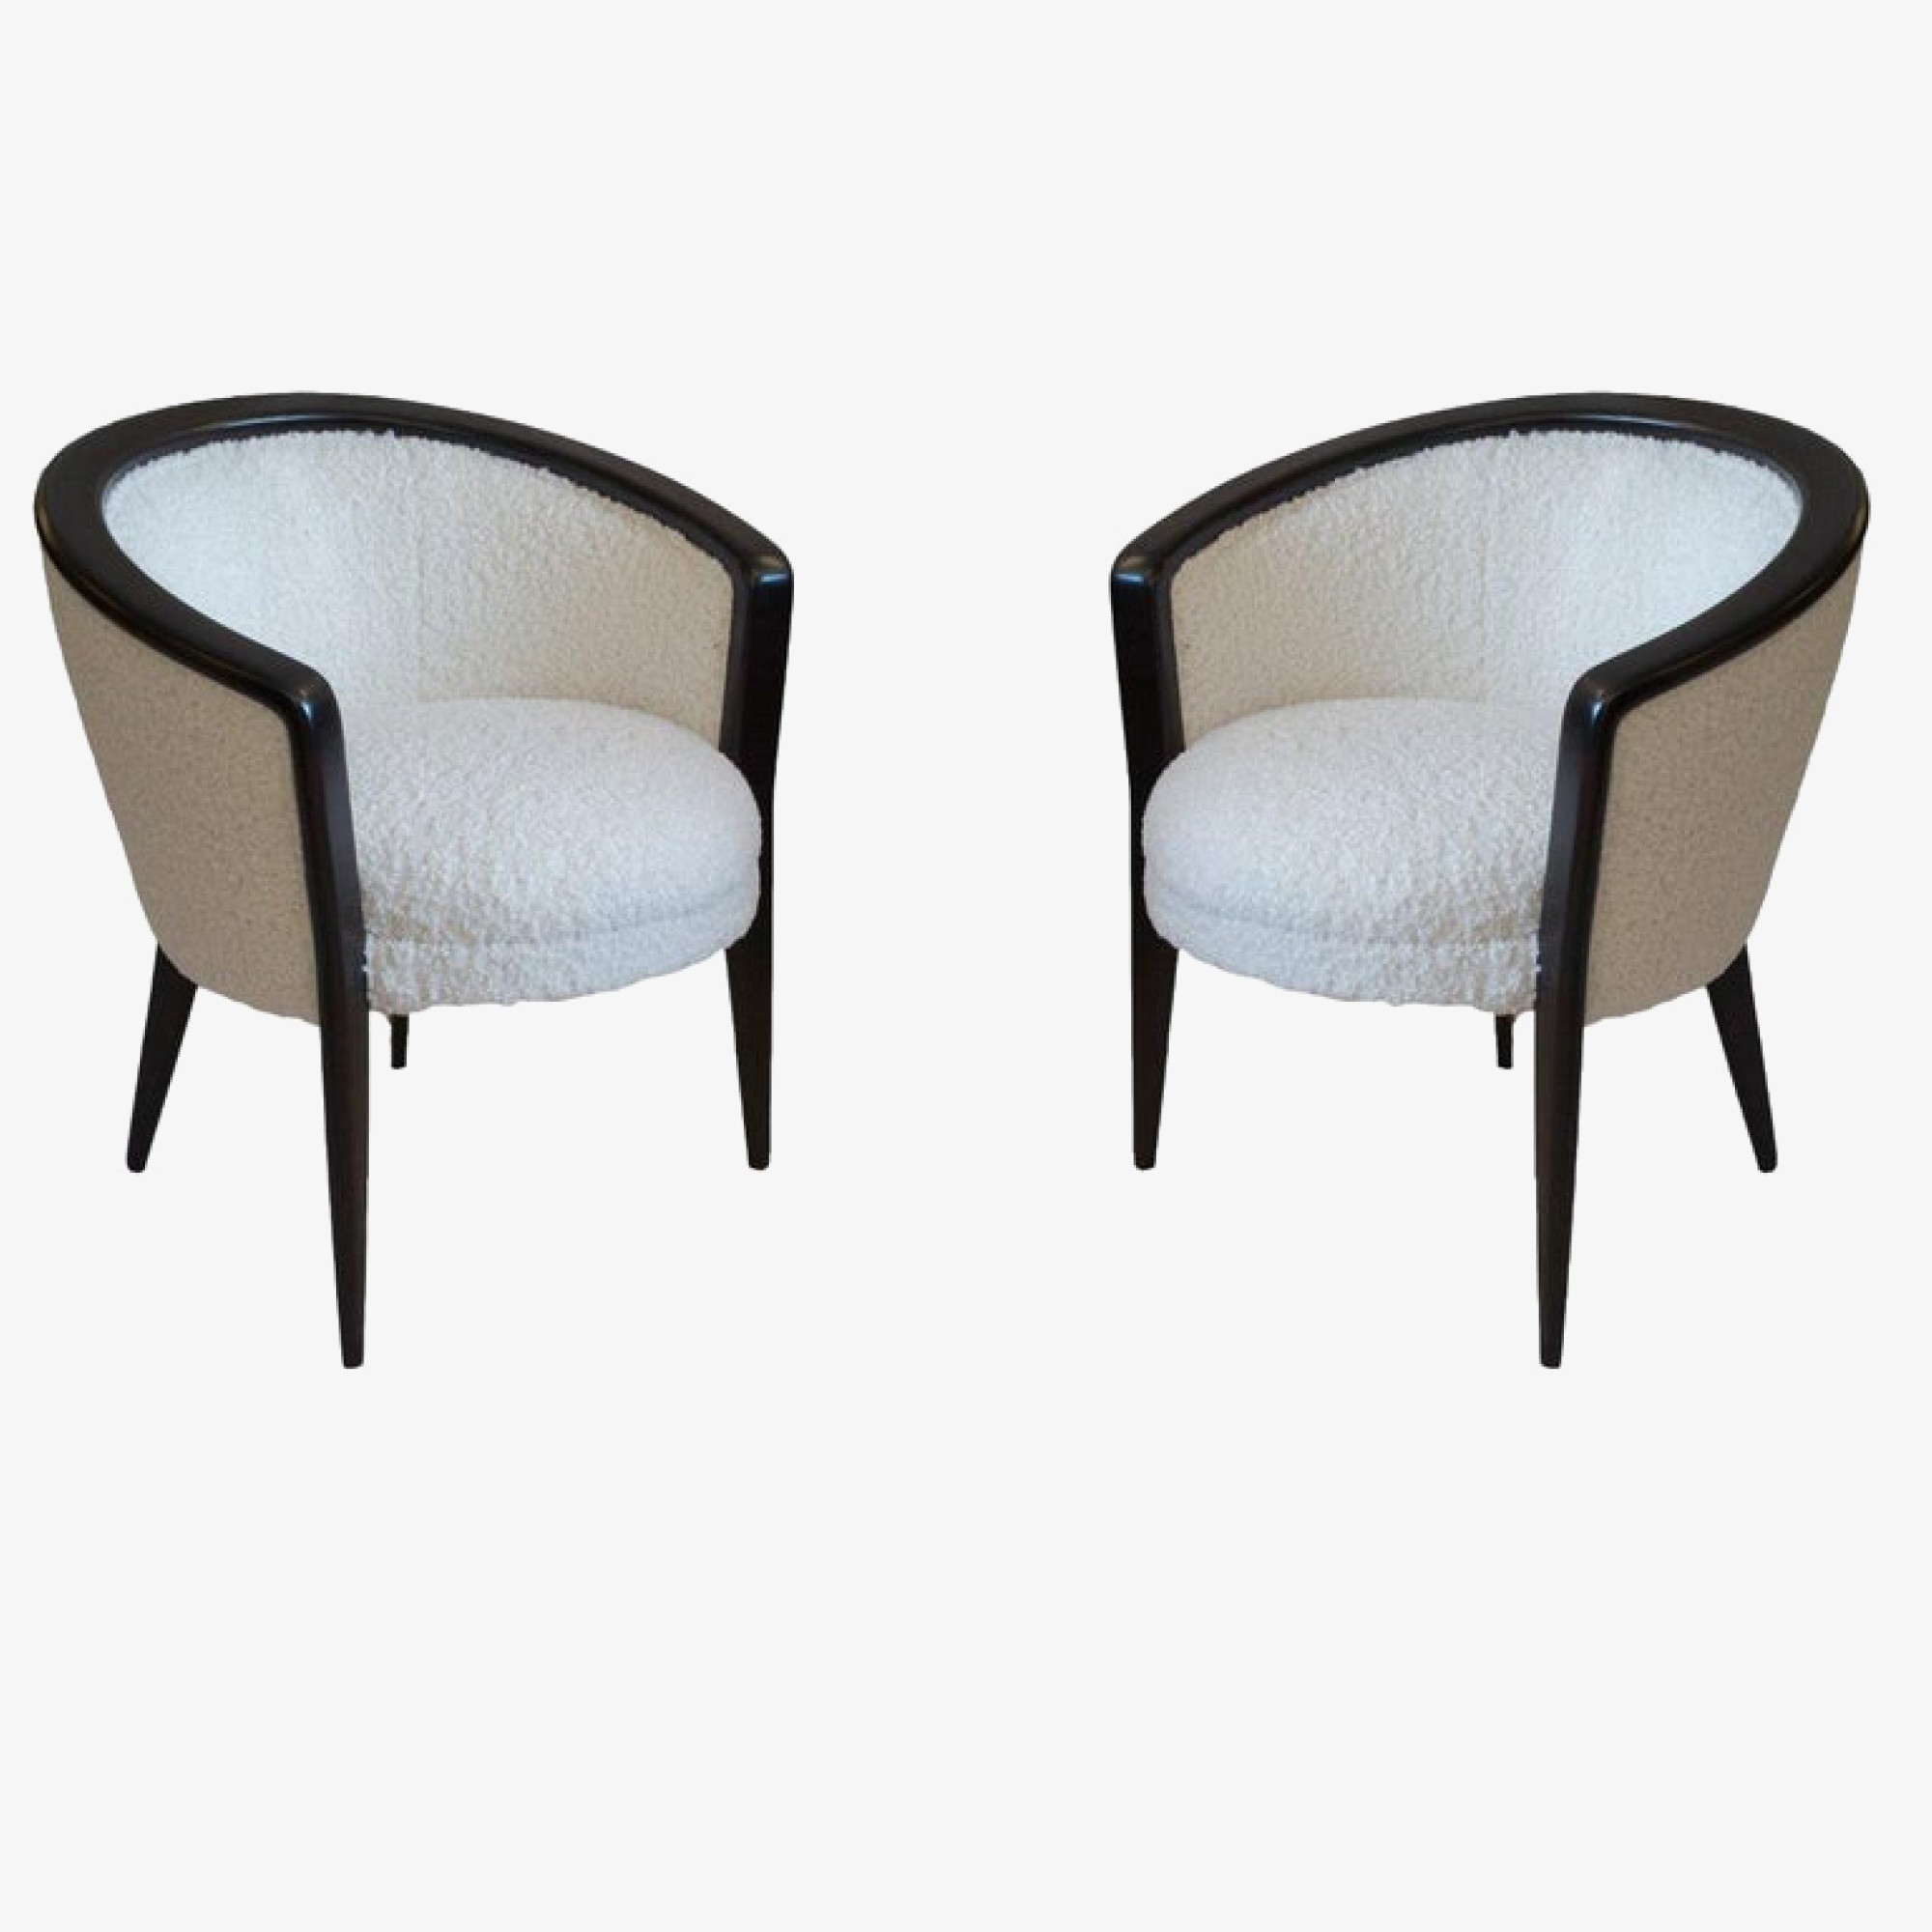 Bespoke French Barrel Chairs in Faux Shearling 2.png